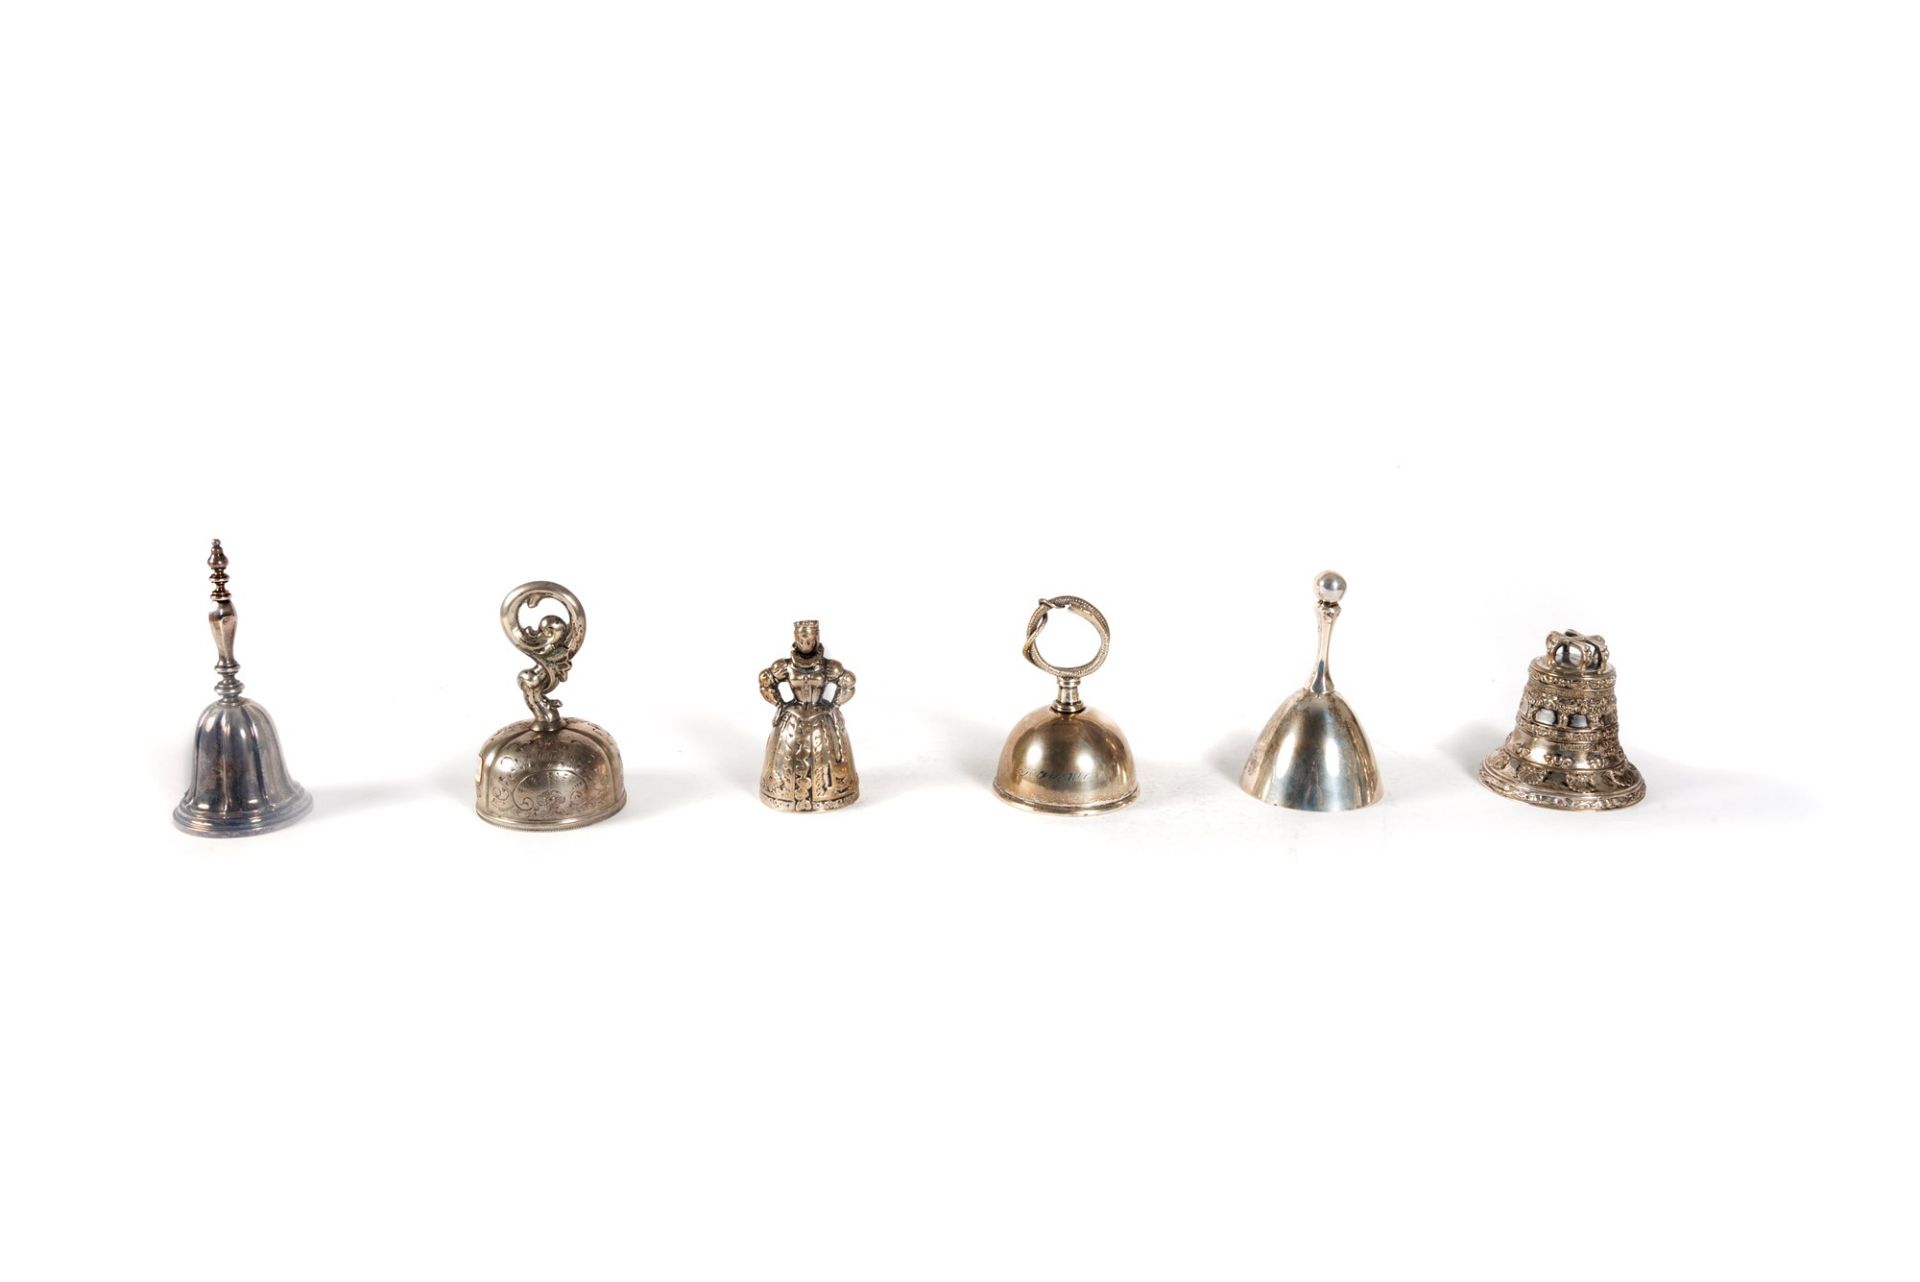 Lot consisting of six silver bells, 19th-20th centuries